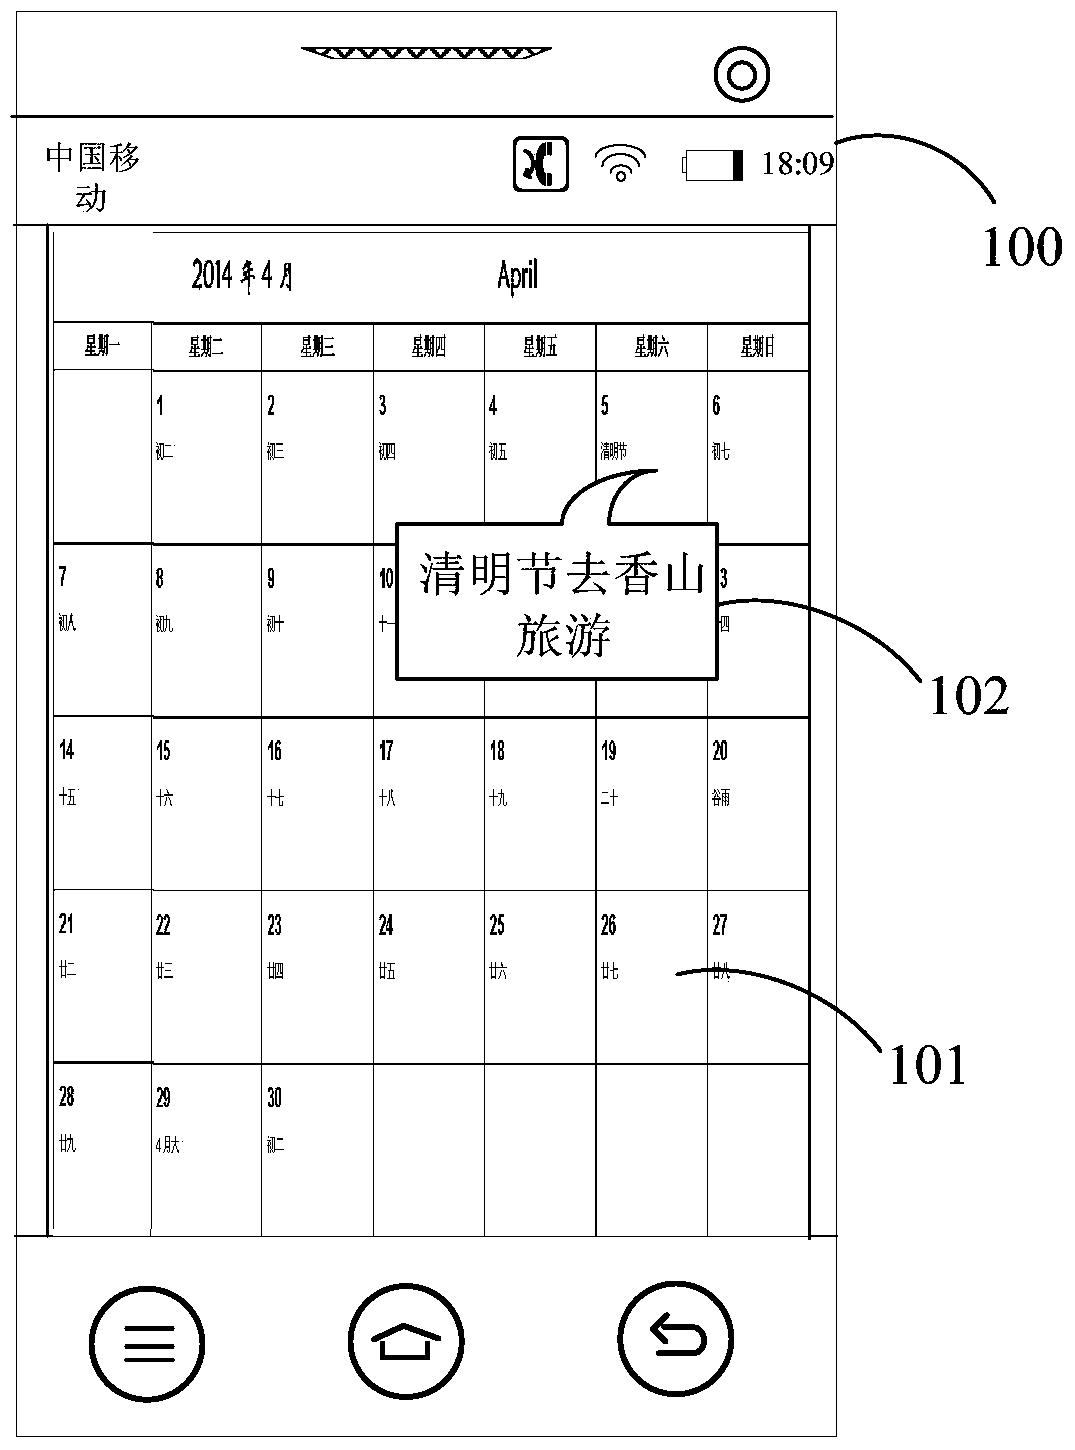 Route information processing method and related device